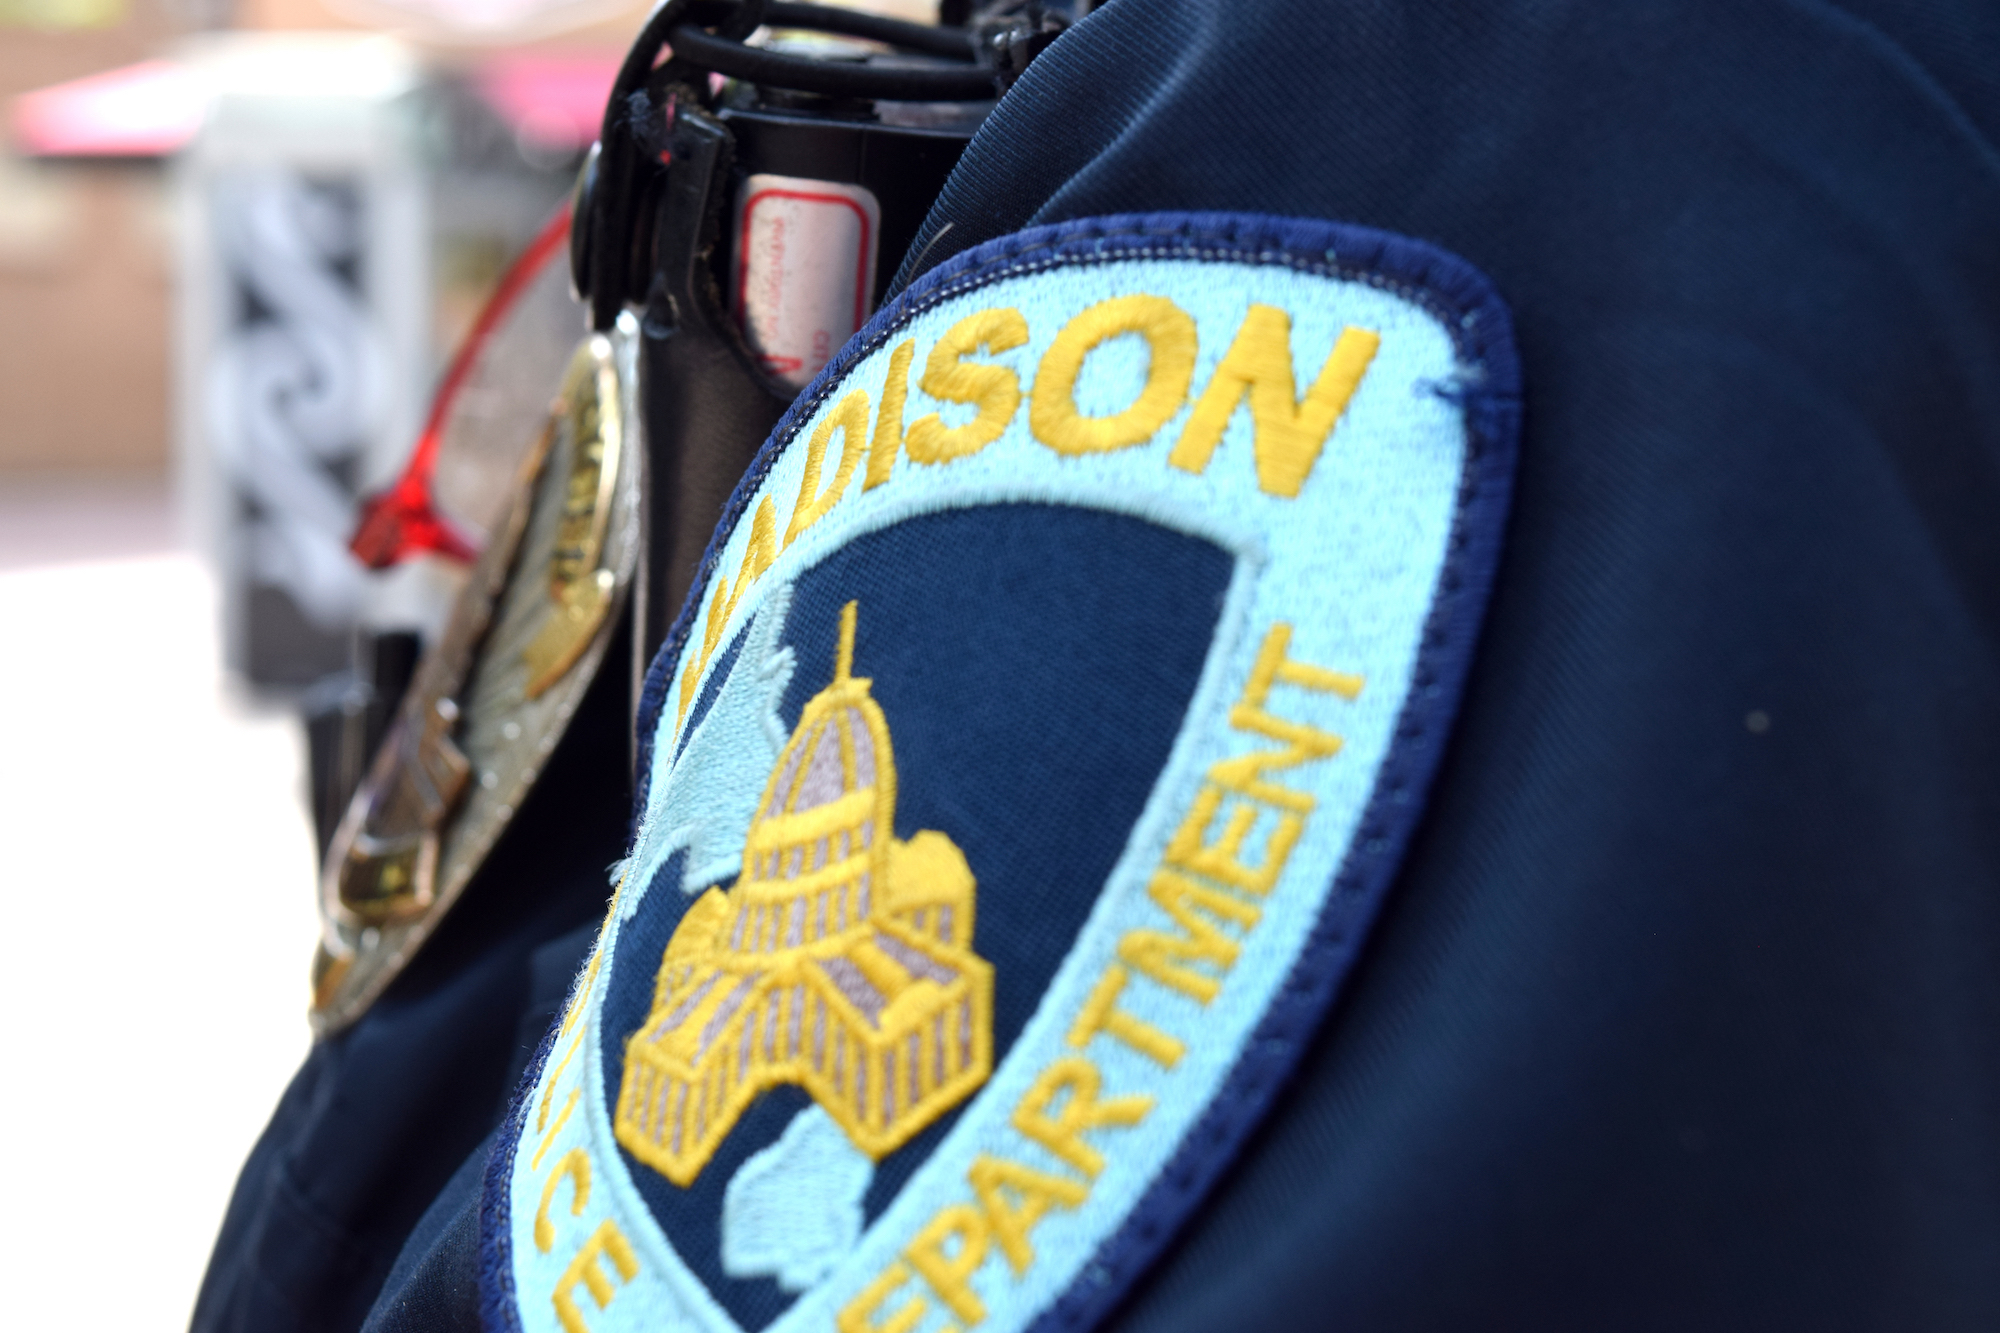 Madison Police Department officer